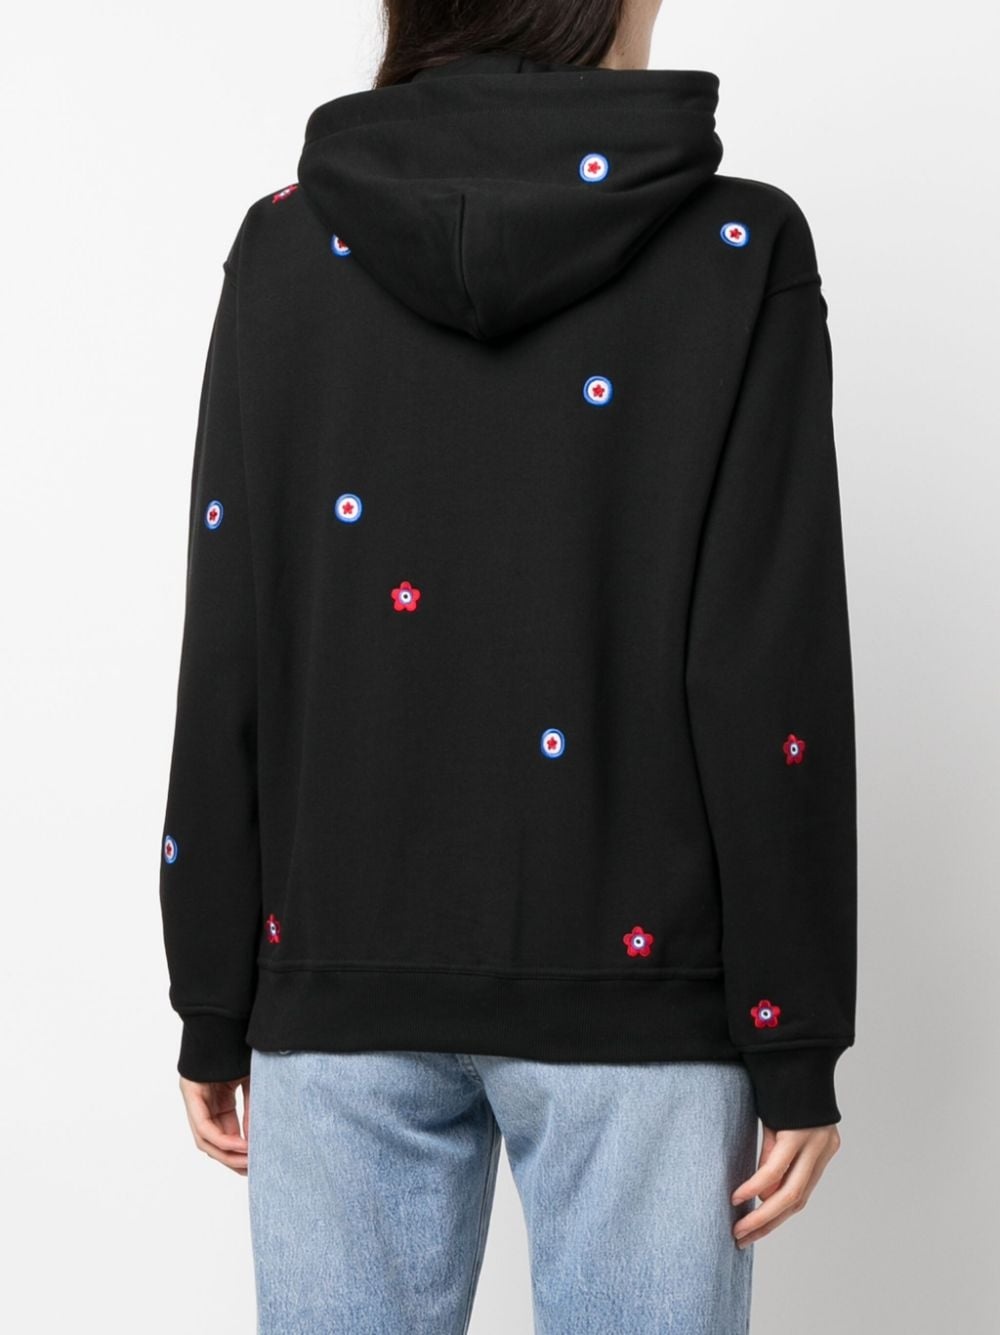 embroidered-design cotton hoodie - 4